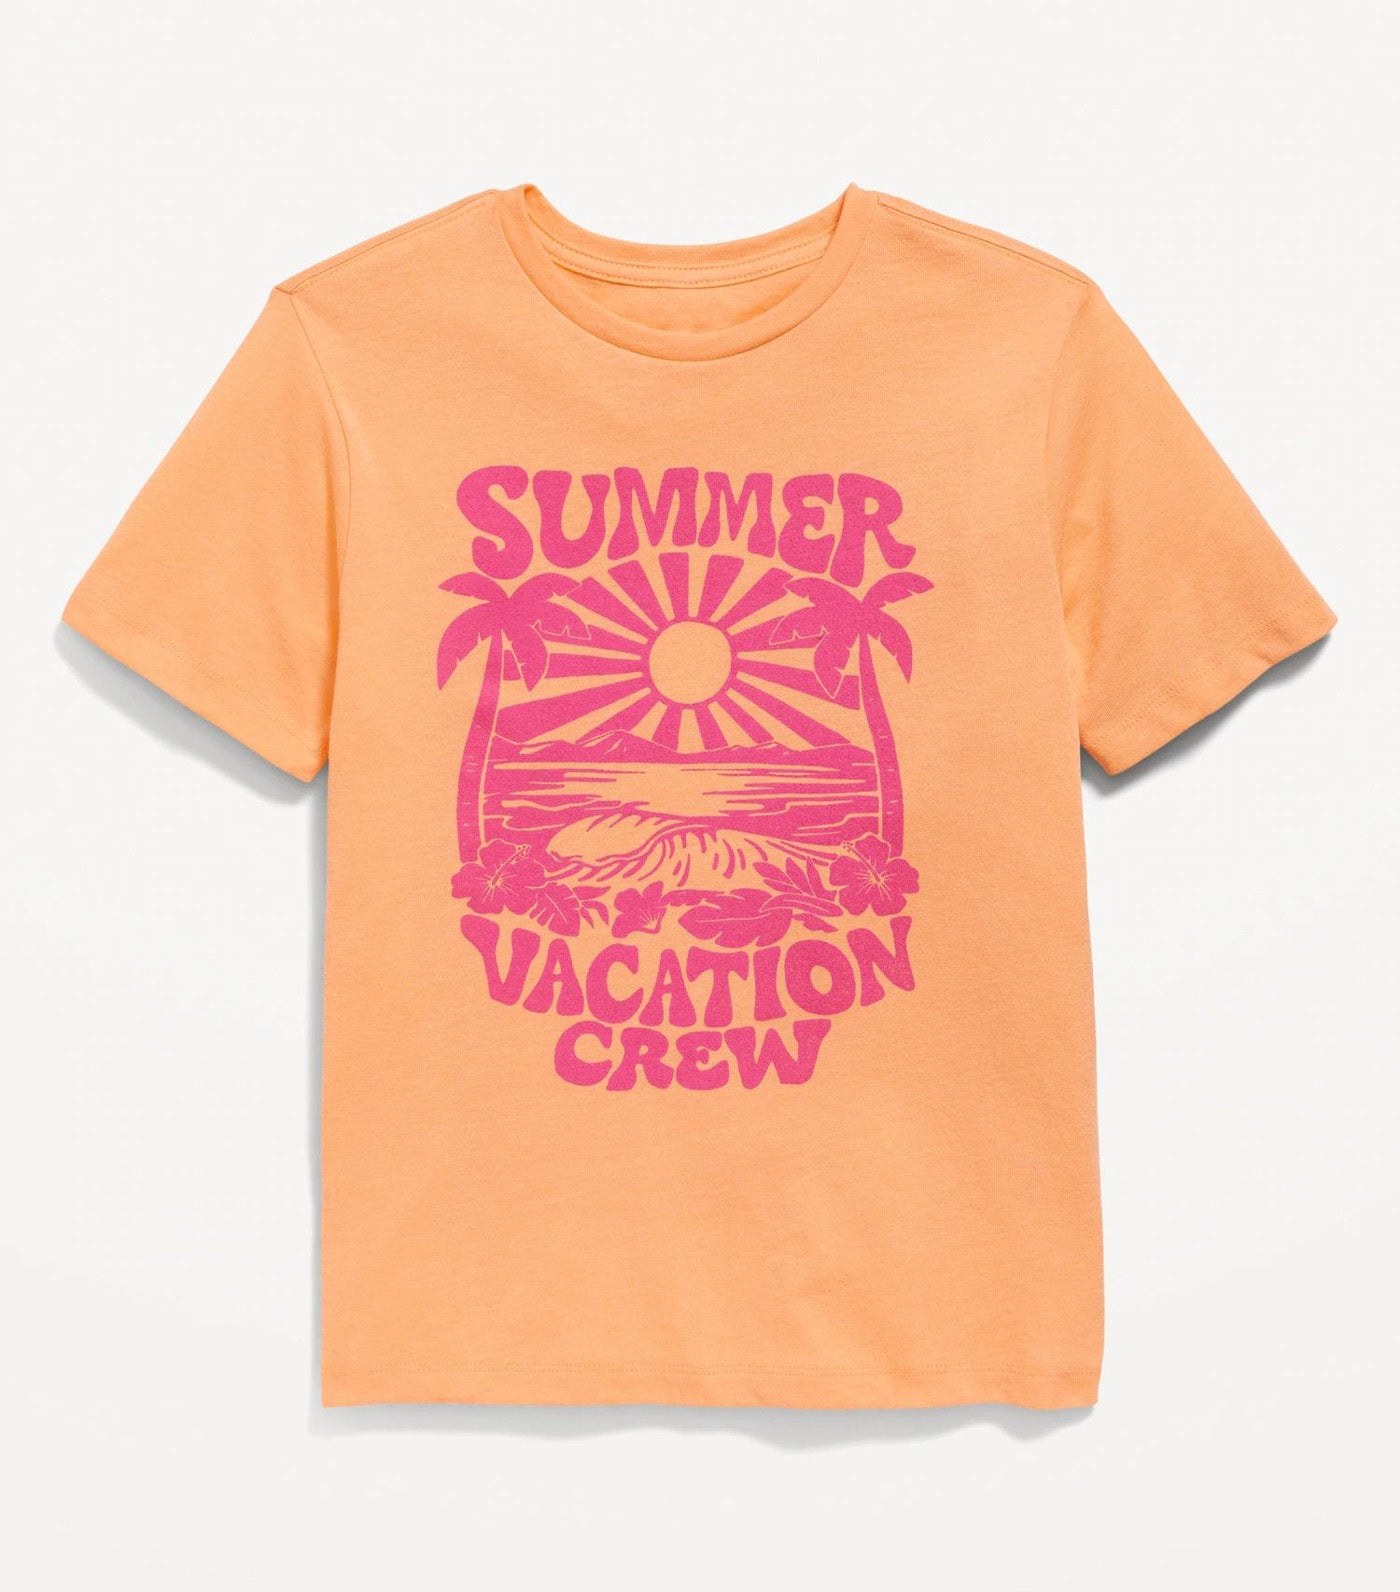 Matching Gender-Neutral Graphic T-Shirt for Kids - Sunfish